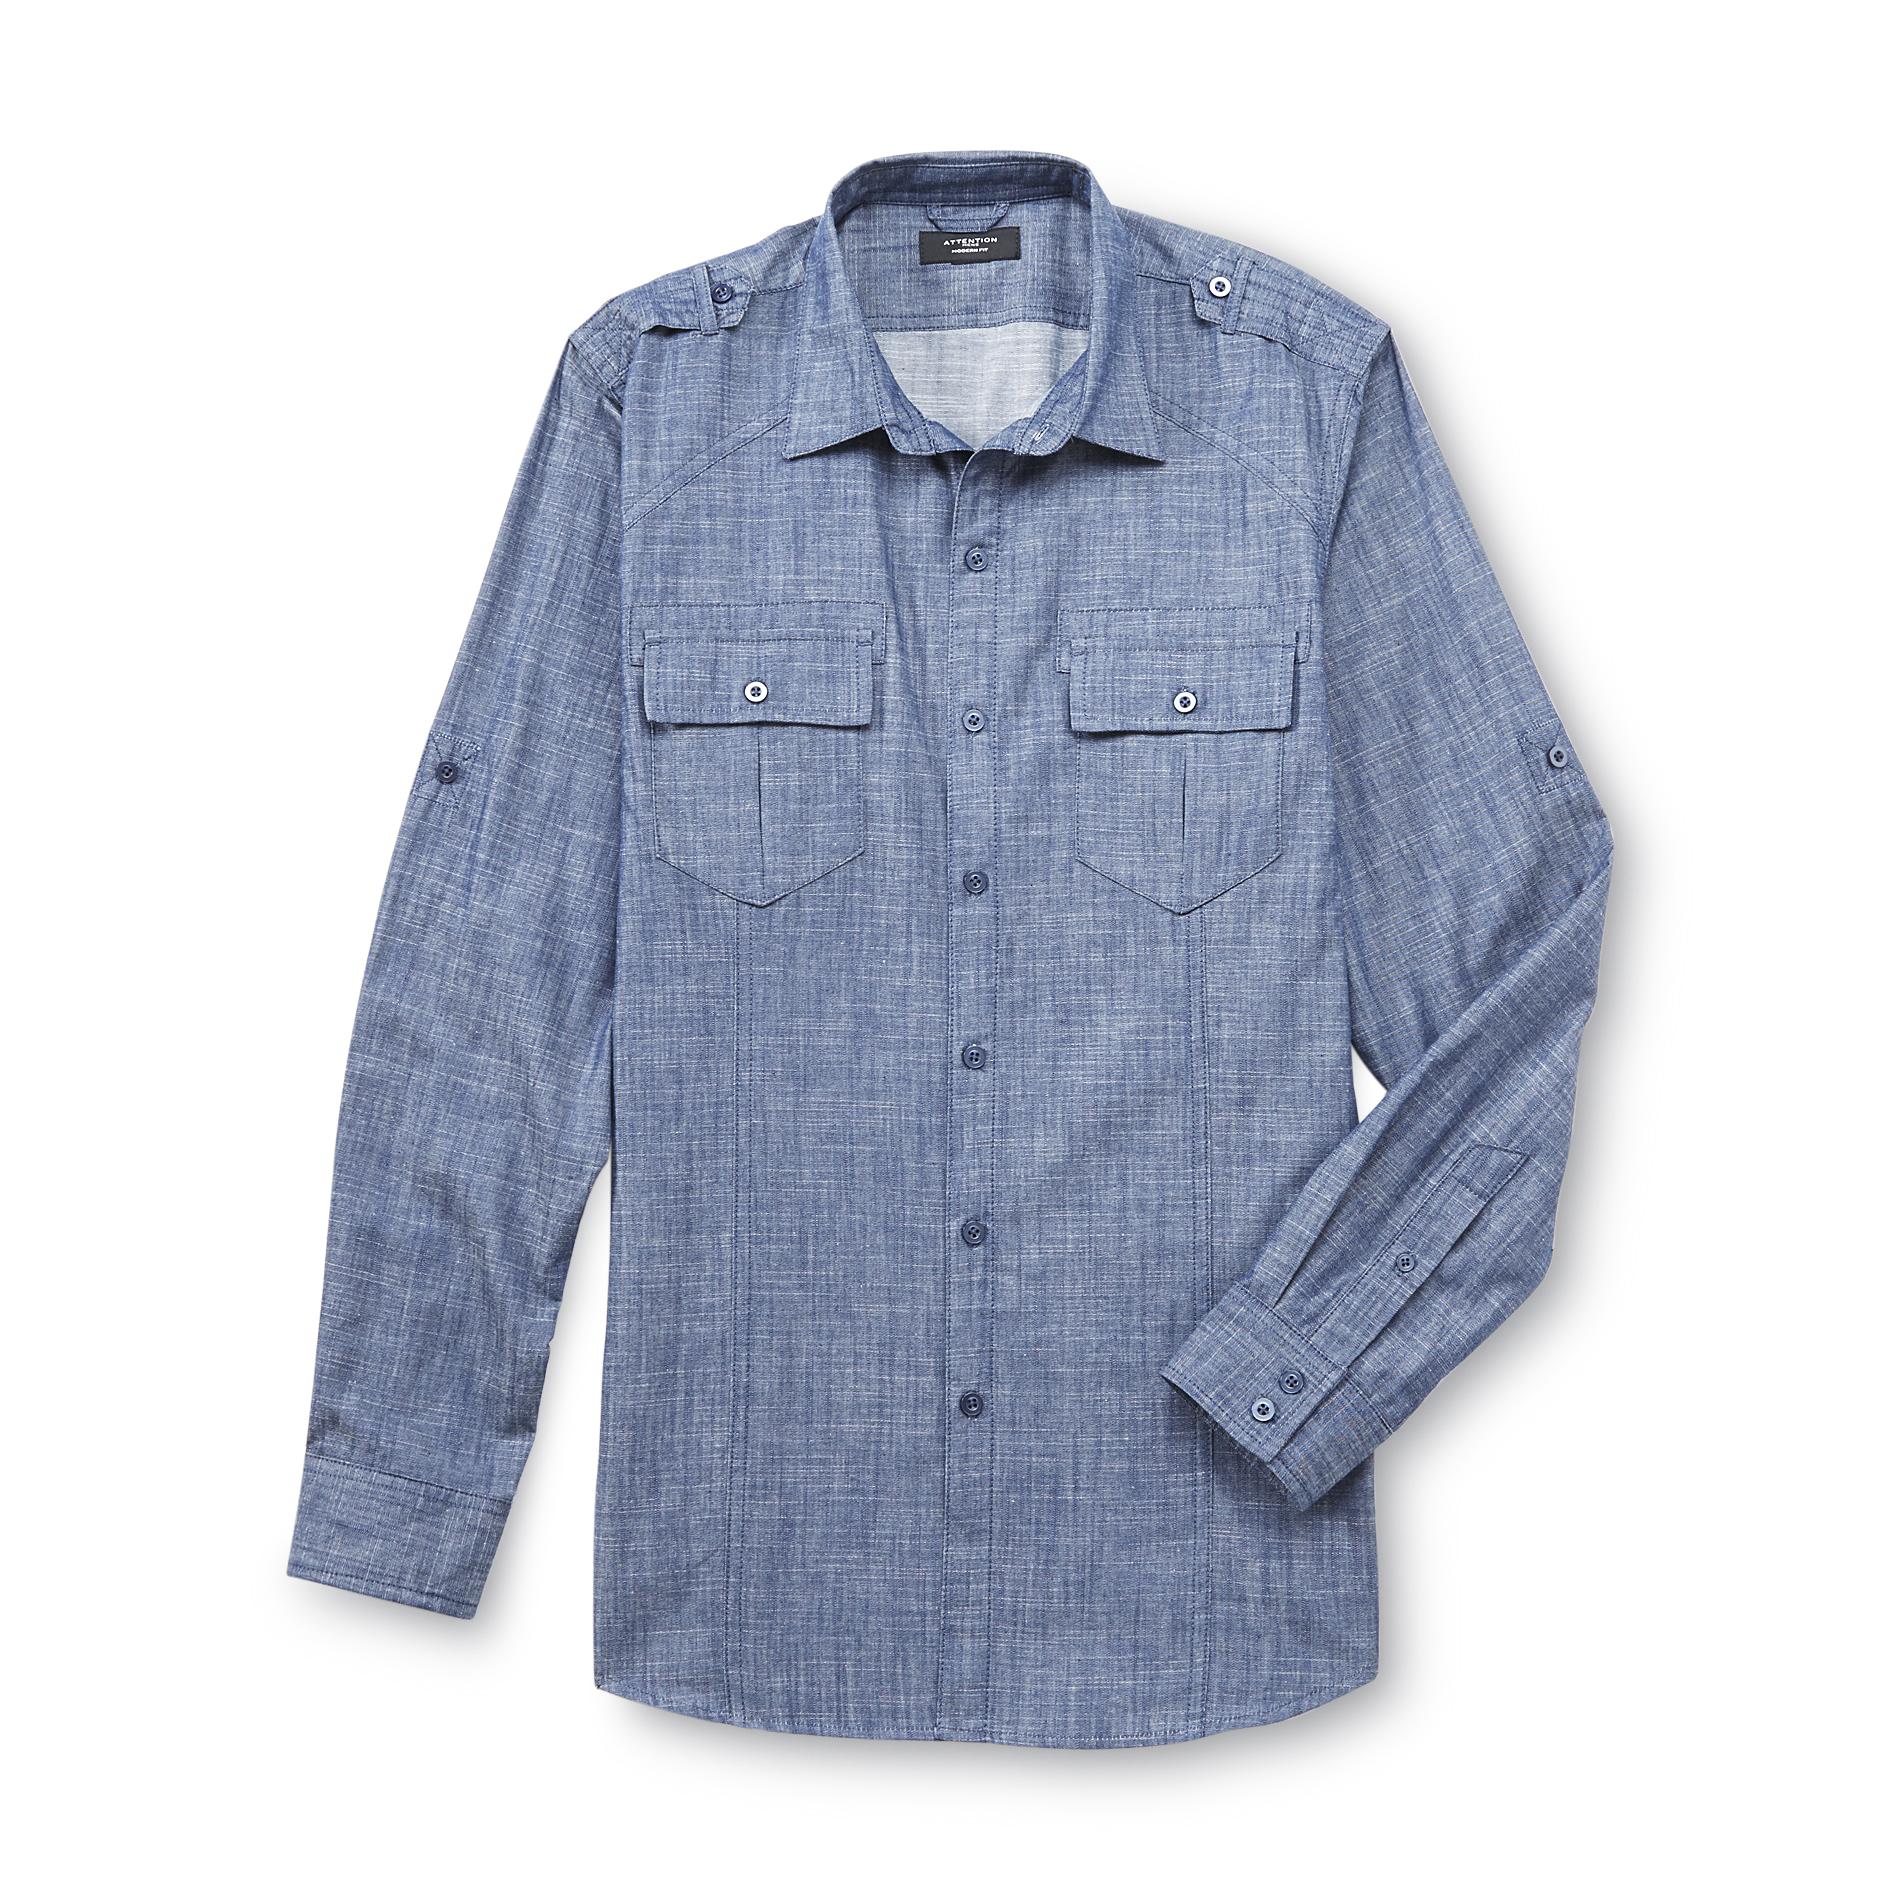 Attention Men's Modern Fit Button-Front Shirt - Chambray